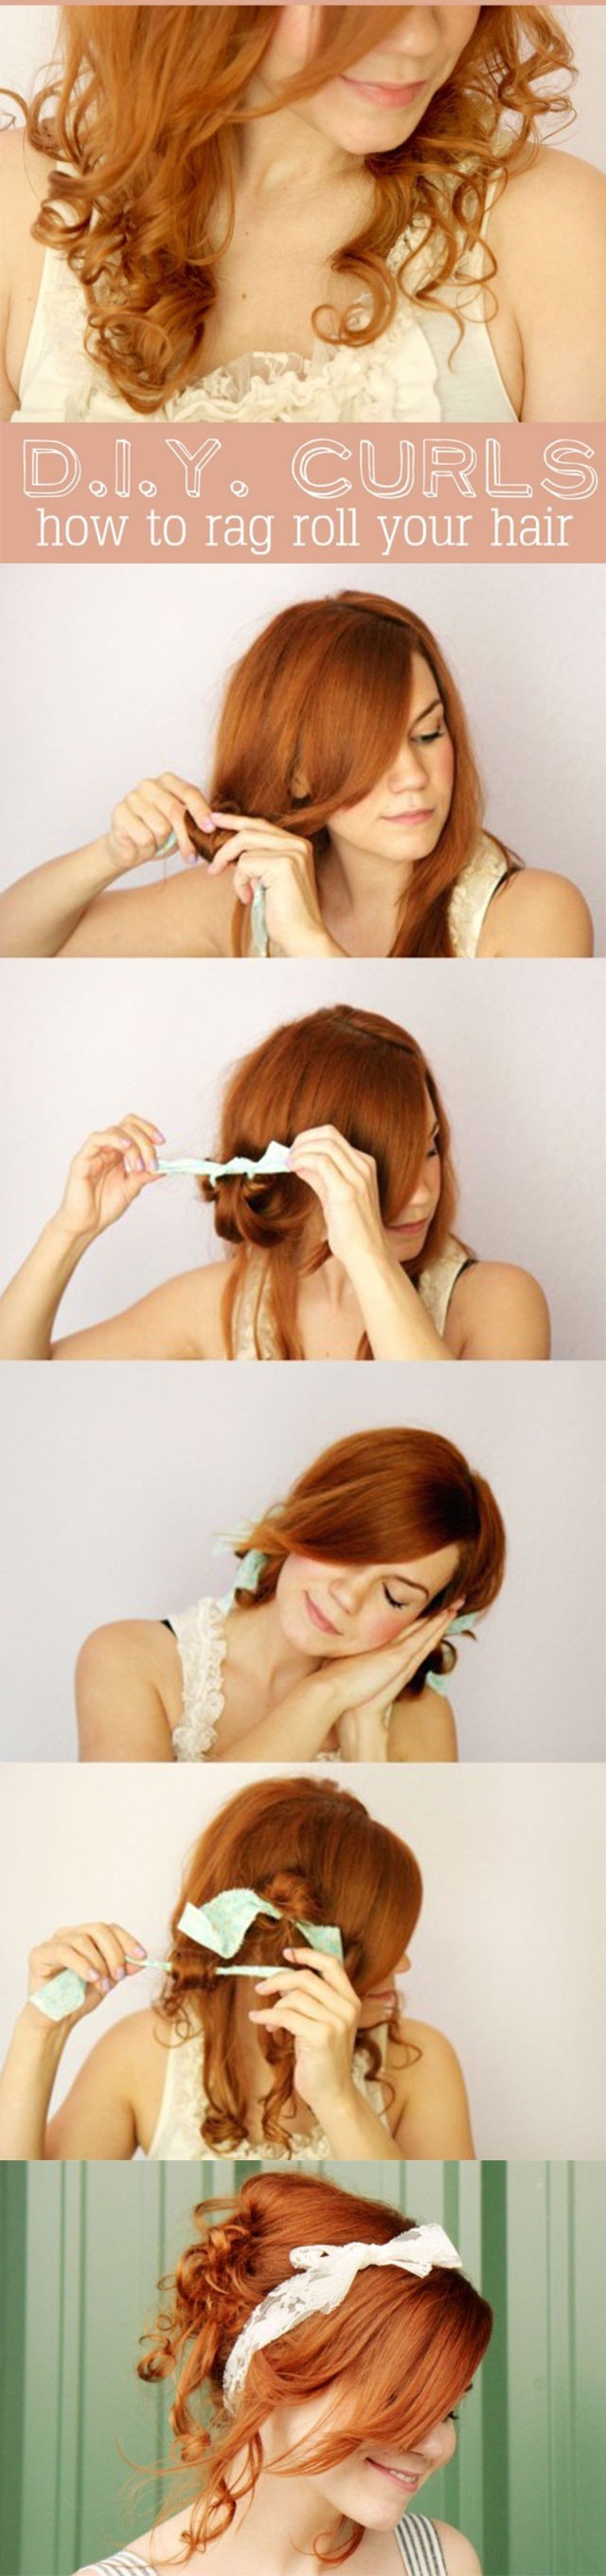 Cute Holiday Hairstyles: How to Rag Roll your Hair